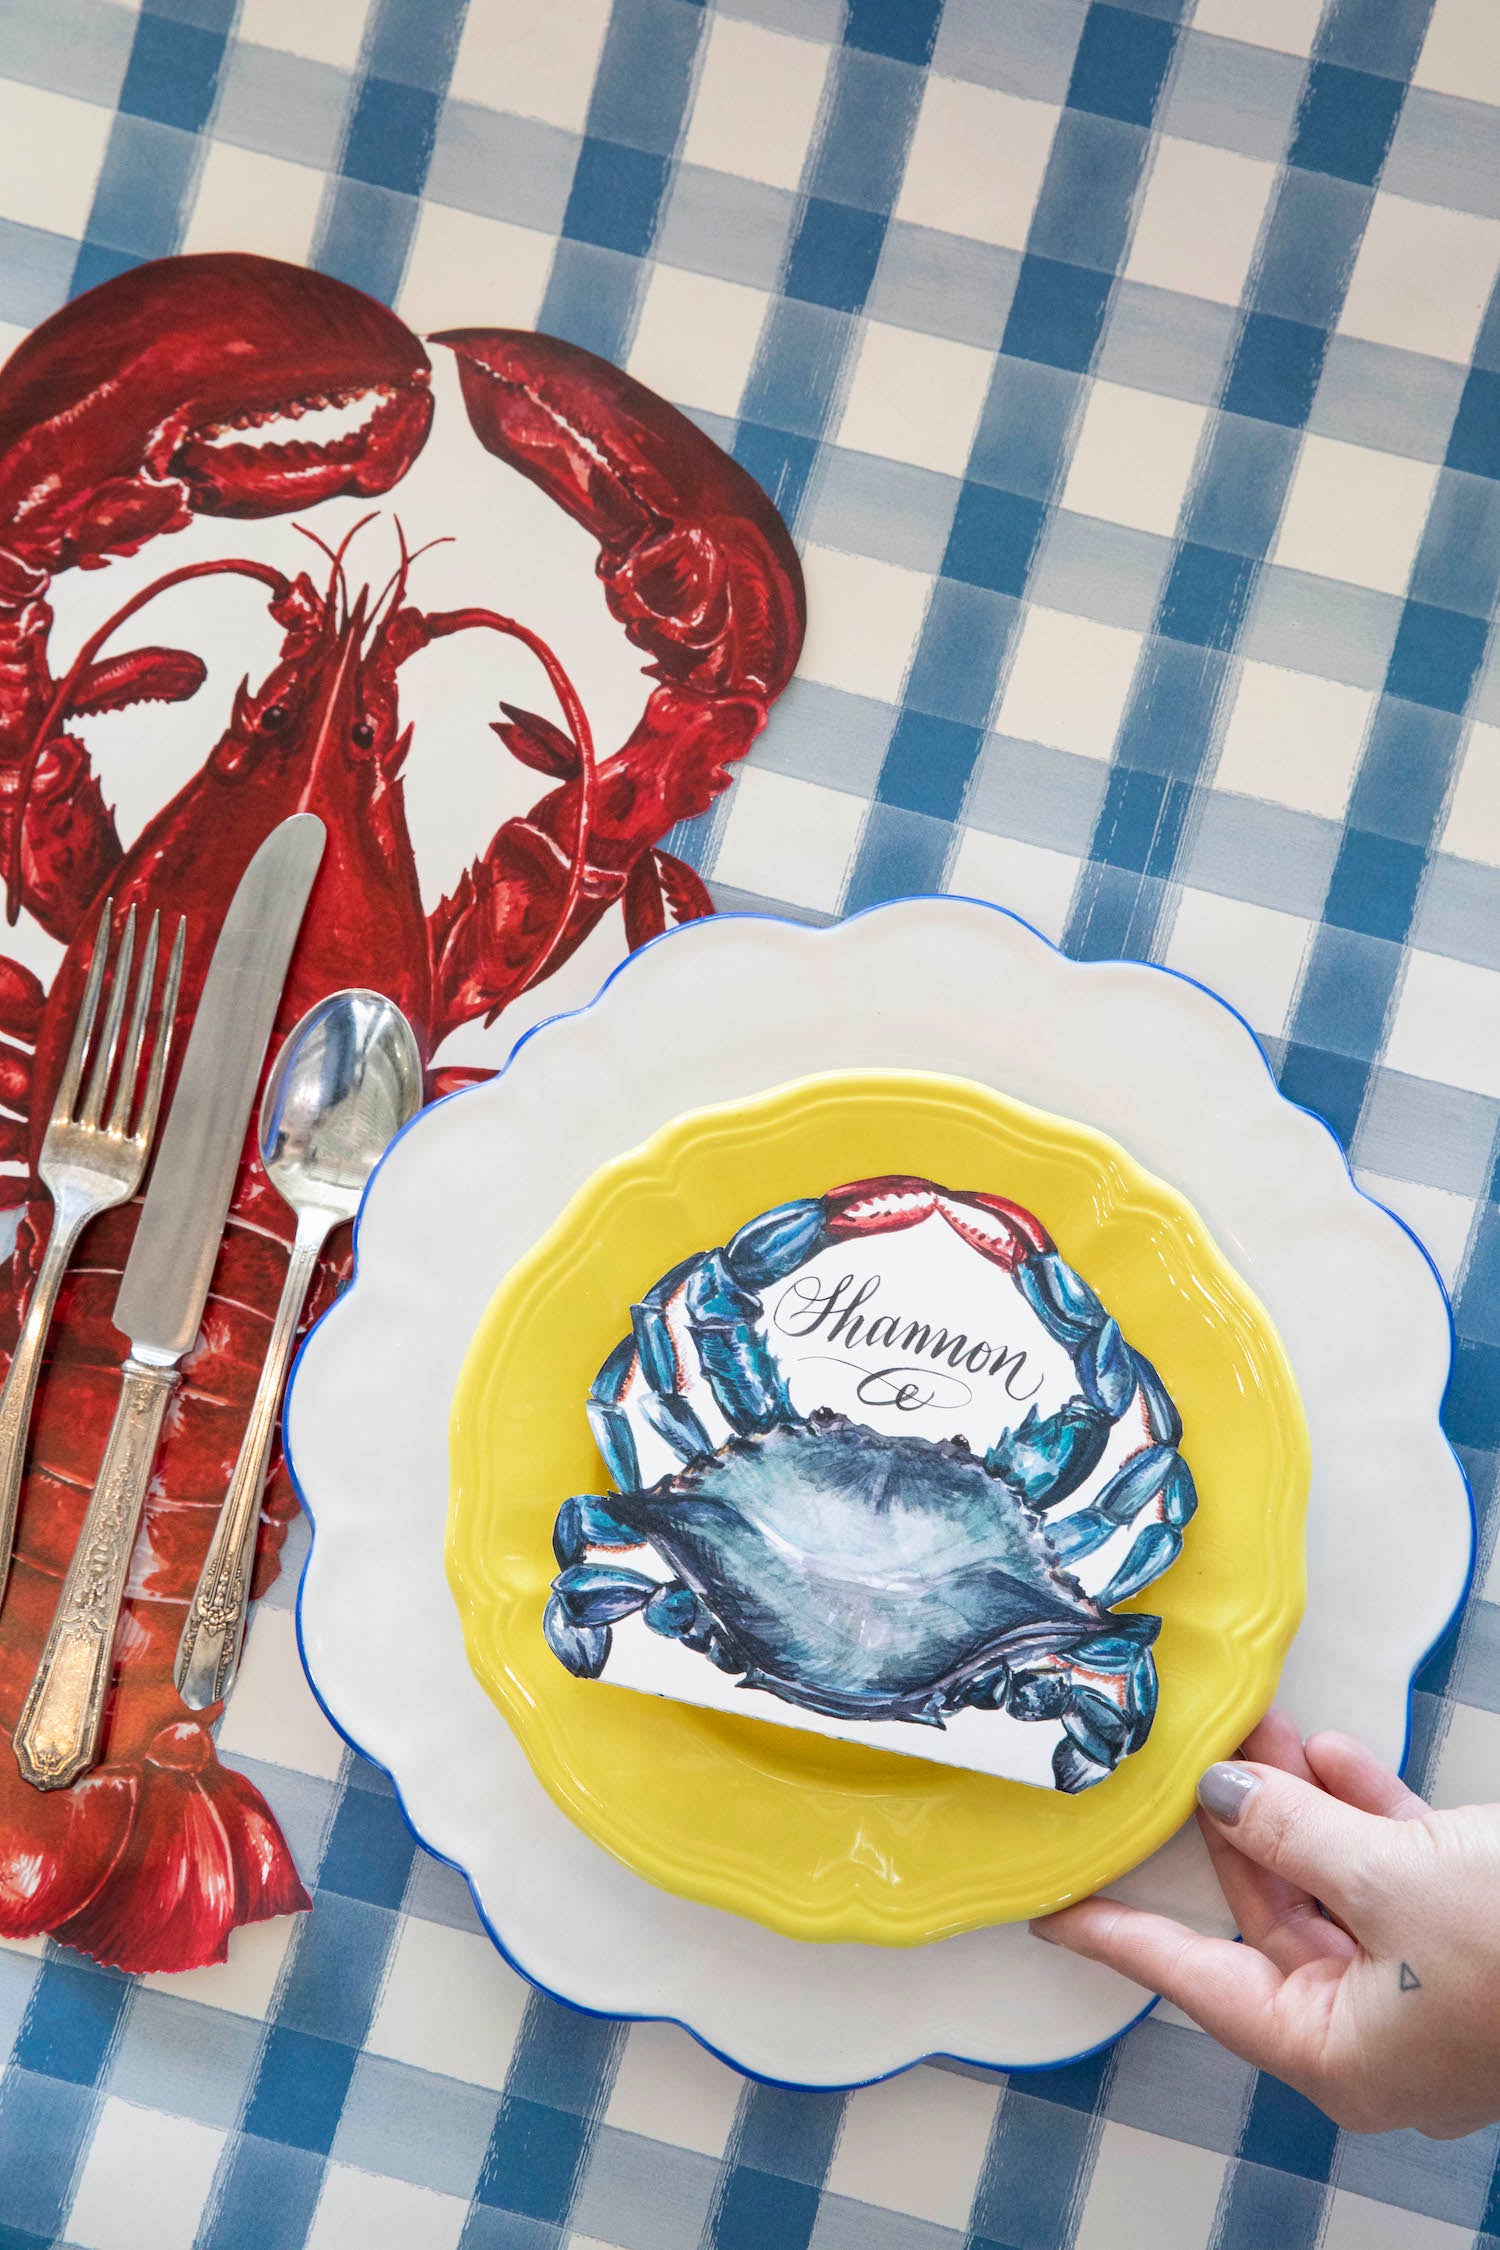 The Die-cut Lobster Placemat under the cutlery in an elegant place setting.